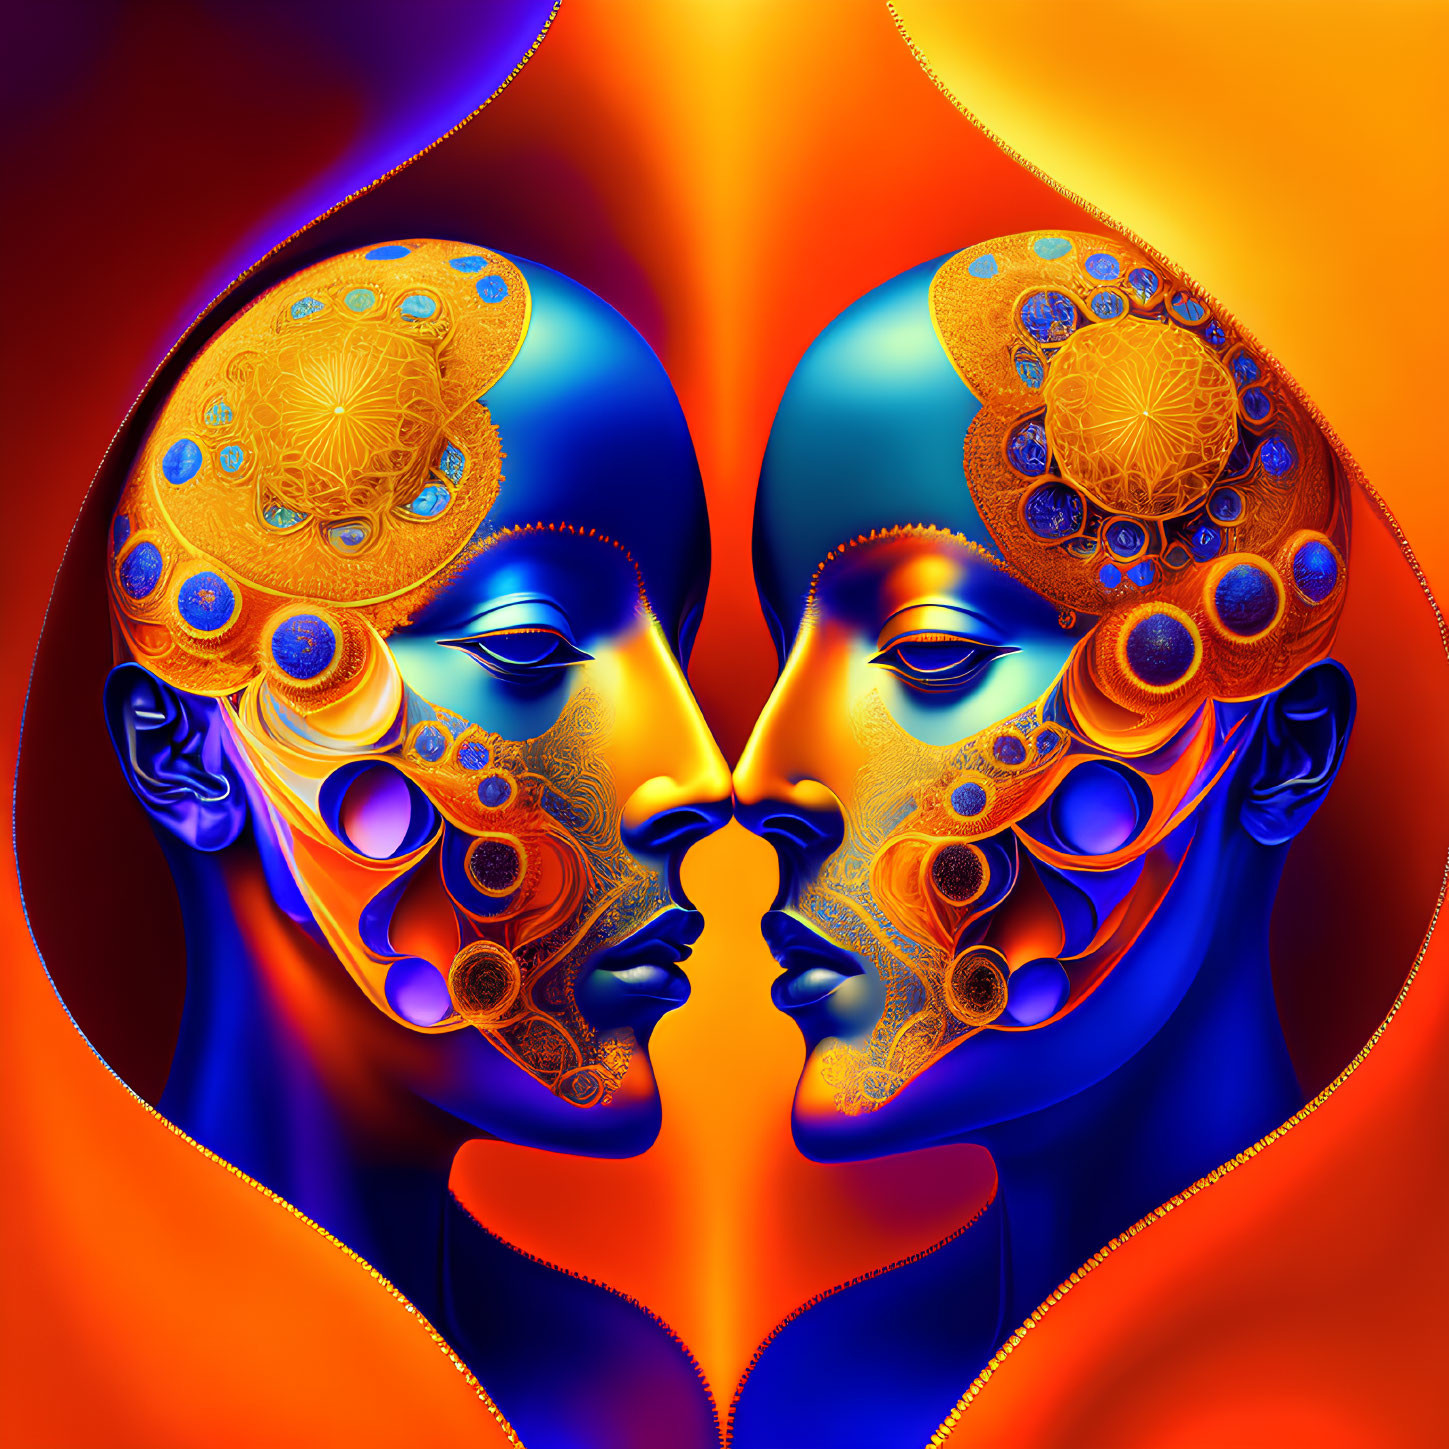 Symmetrical Stylized Faces with Vibrant Orange and Blue Hues